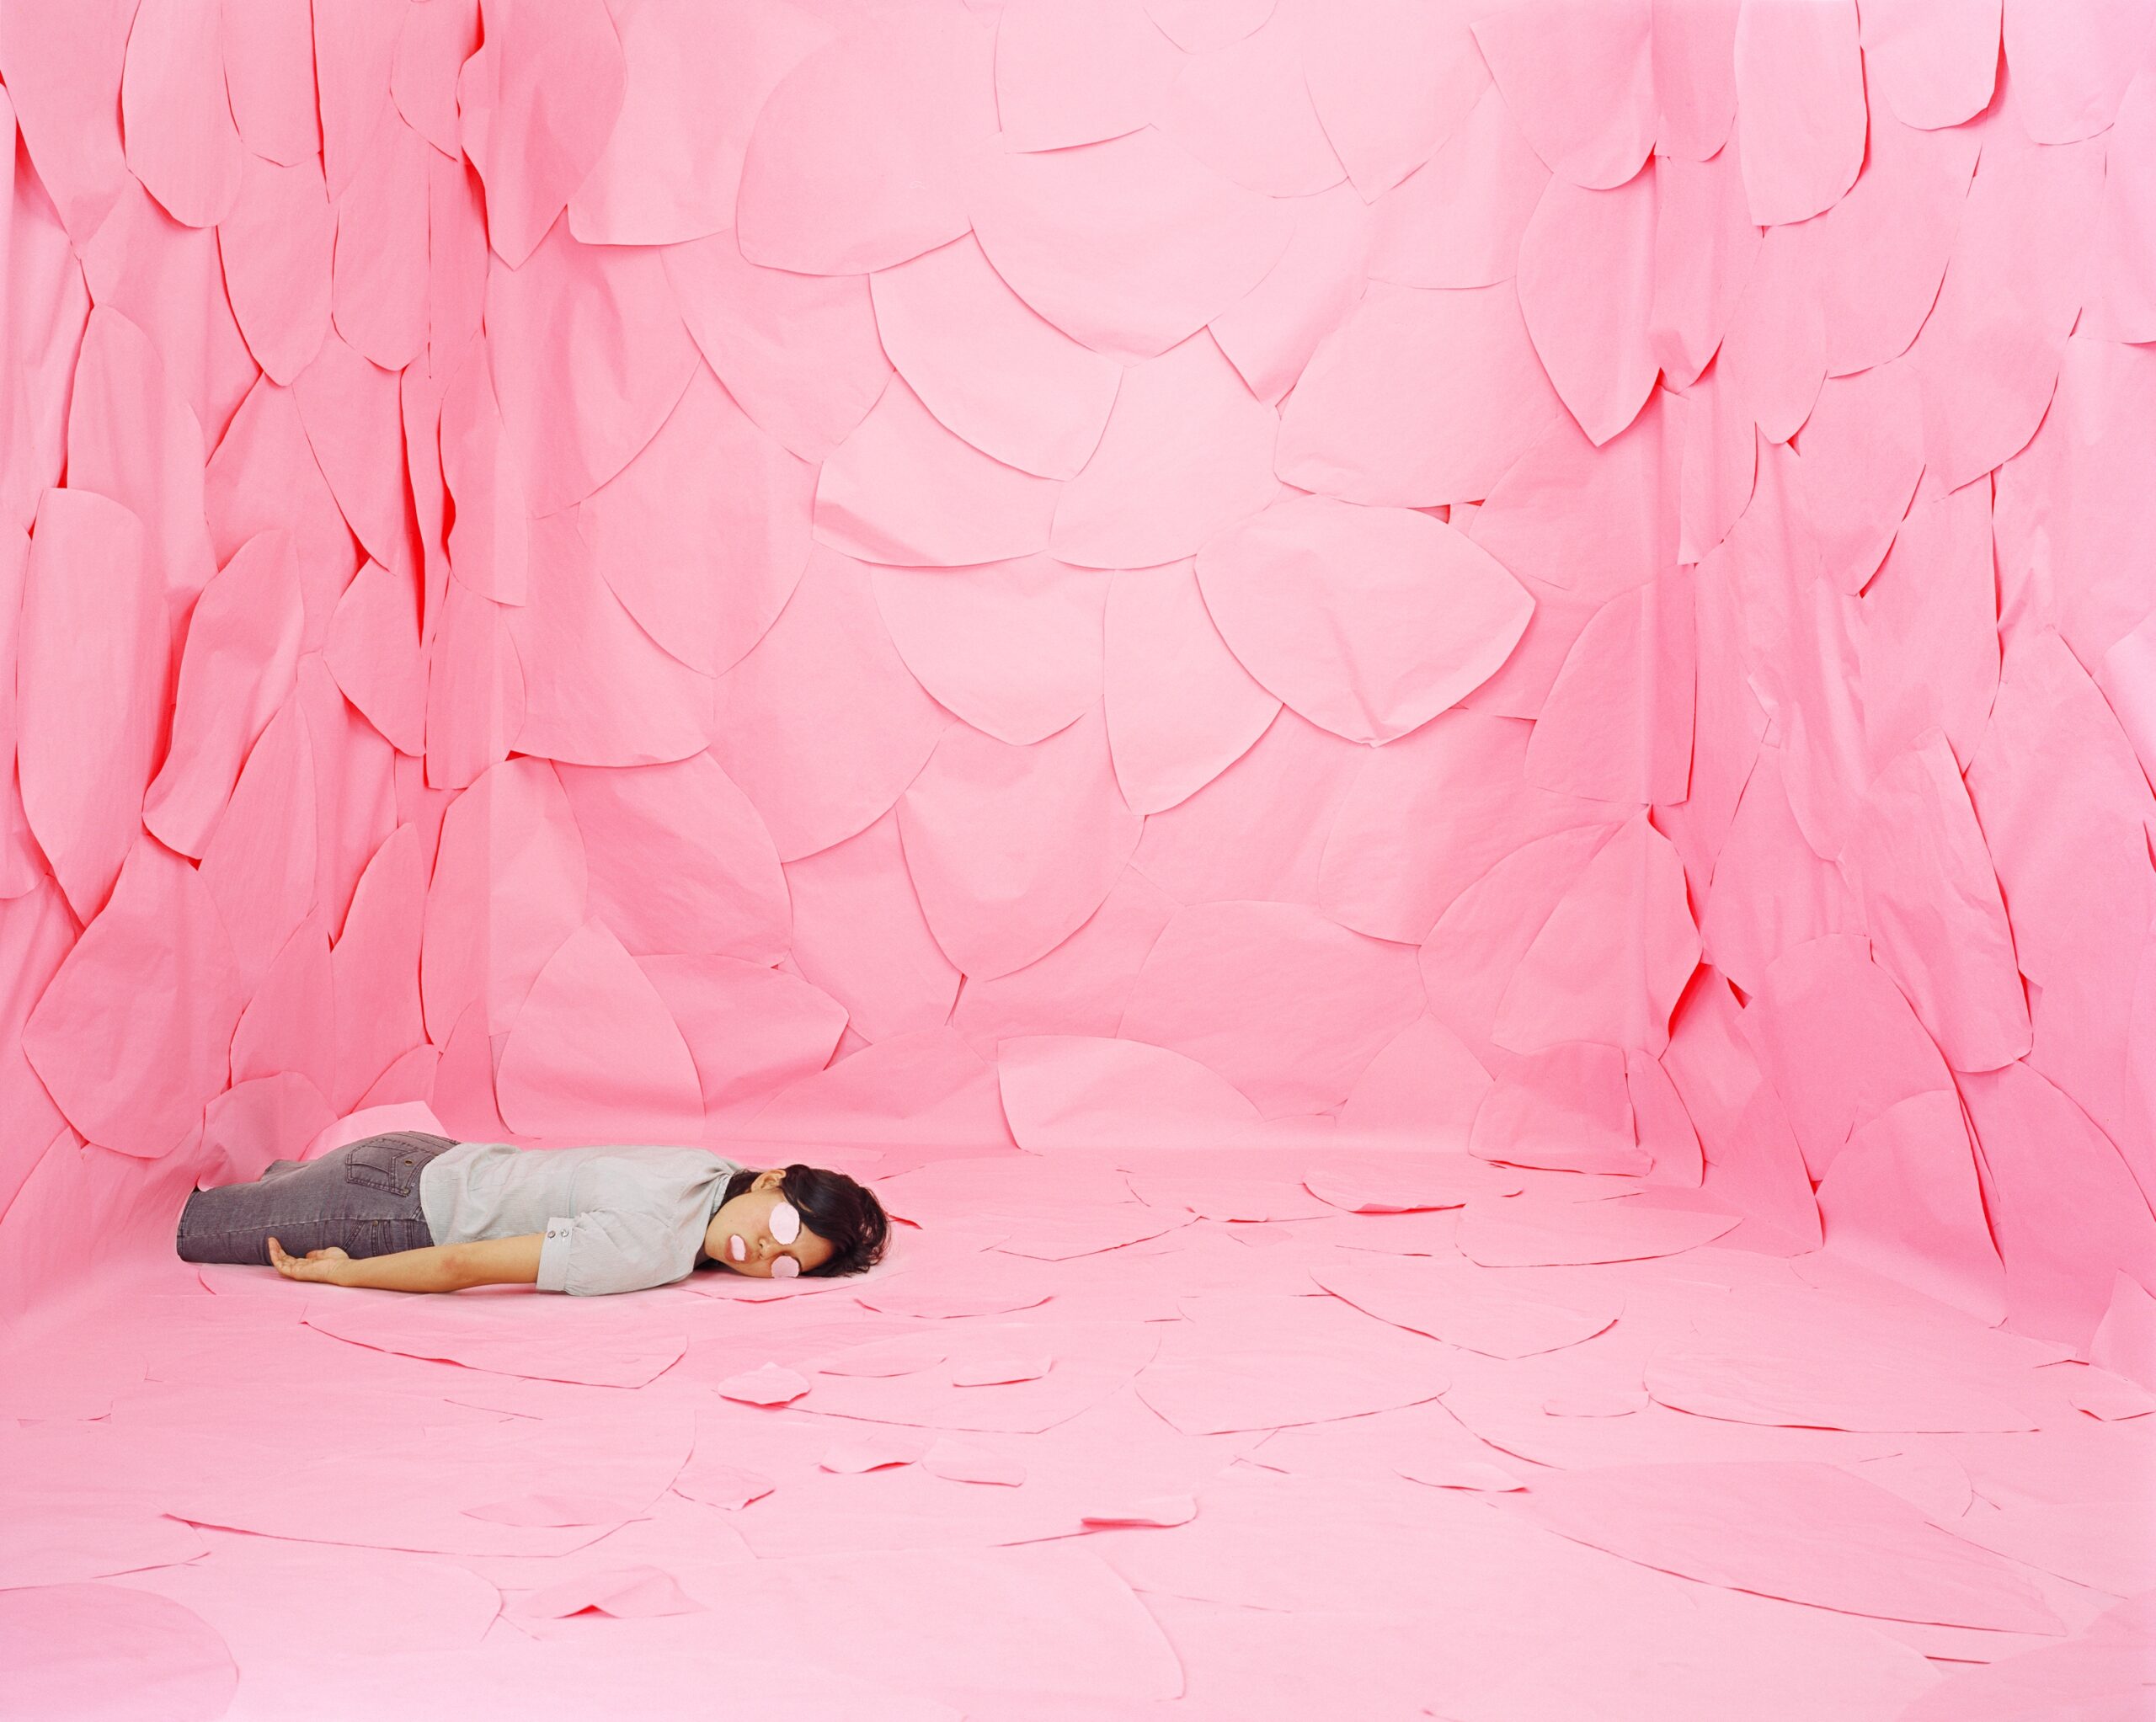 Gina Osterloh, Mute Rash, 2008. 30 x 38.5 inches, archival pigment print. Image courtesy of the artist, Higher Pictures Generation (Brooklyn, NY), and Silverlens Galleries (Manila, Philippines)